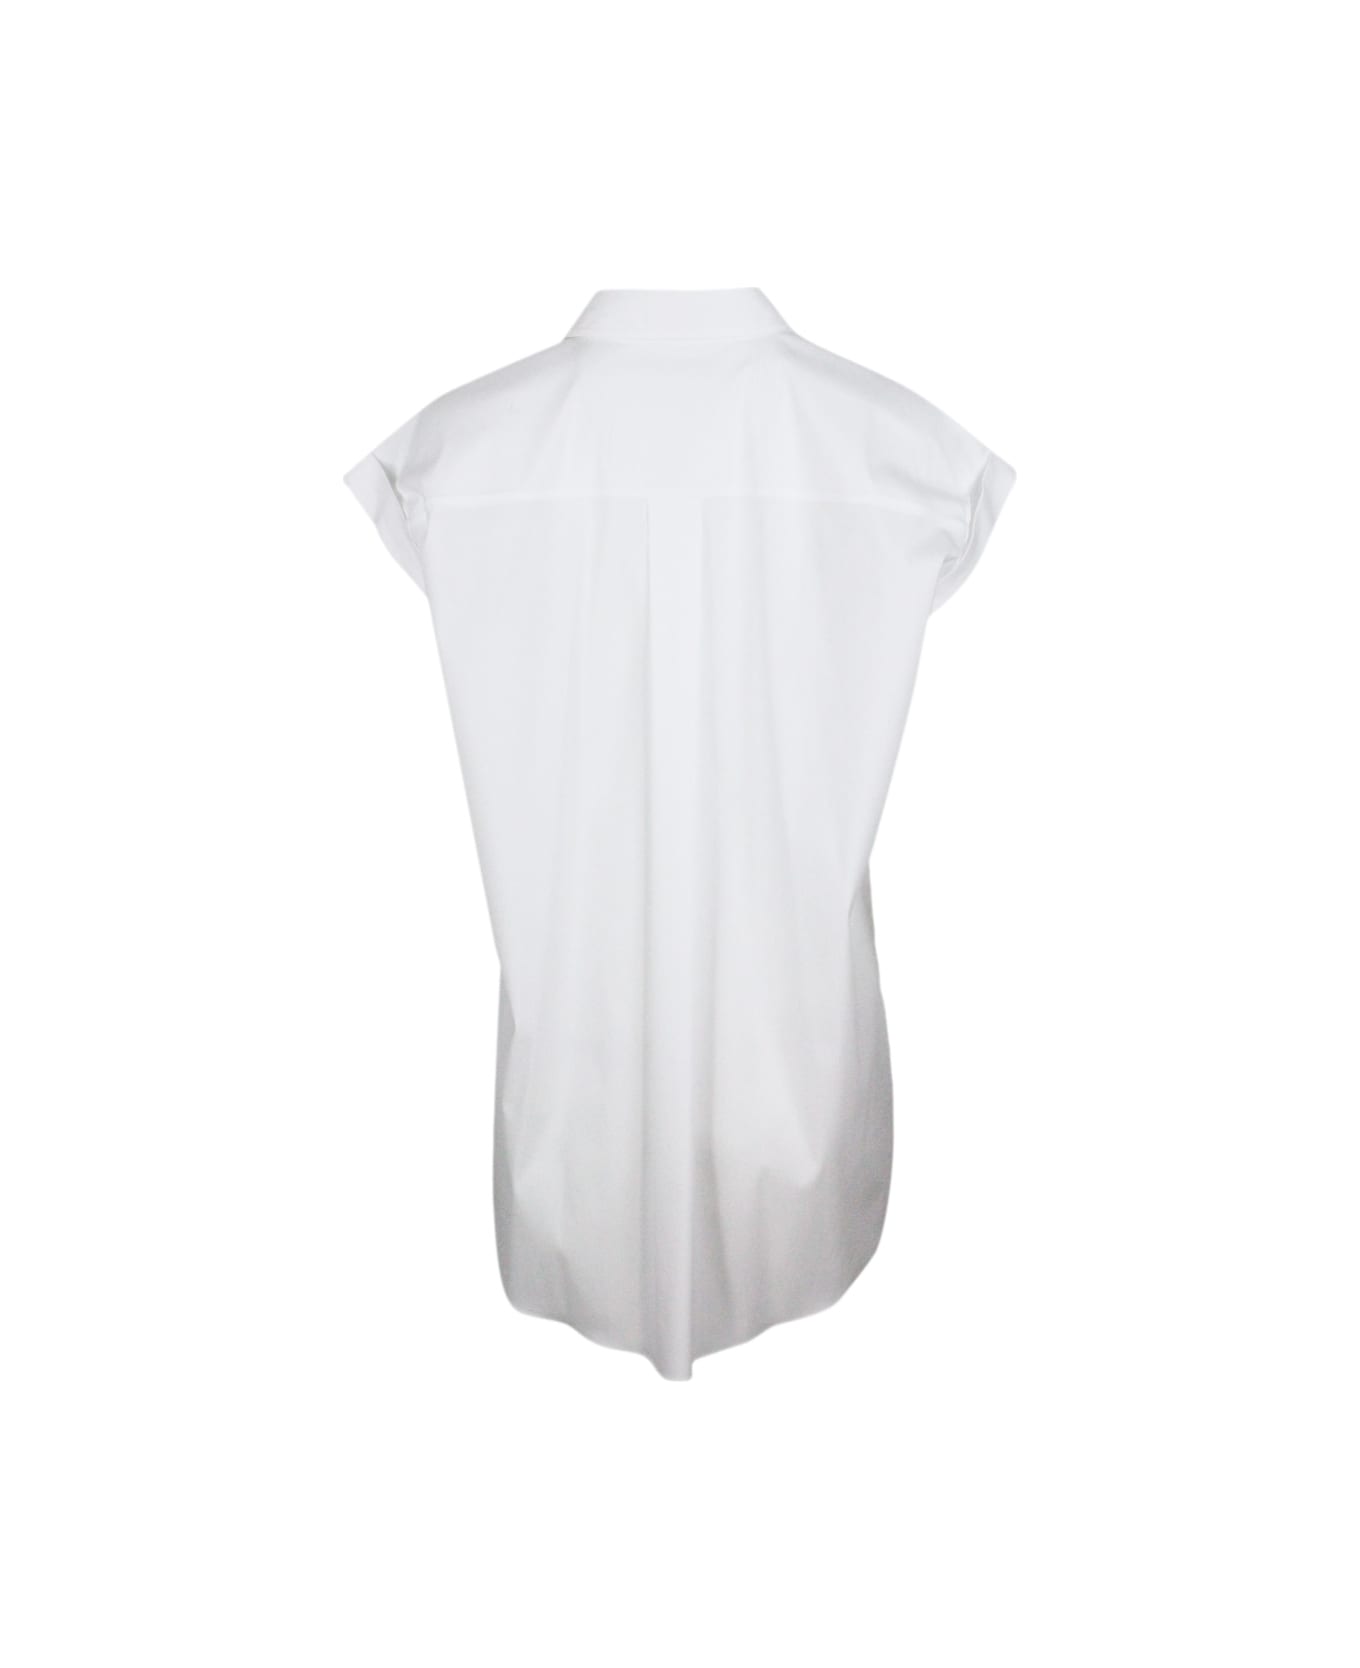 Brunello Cucinelli Sleeveless Shirt With Front Pockets Embellished With Shiny Jewels - White シャツ